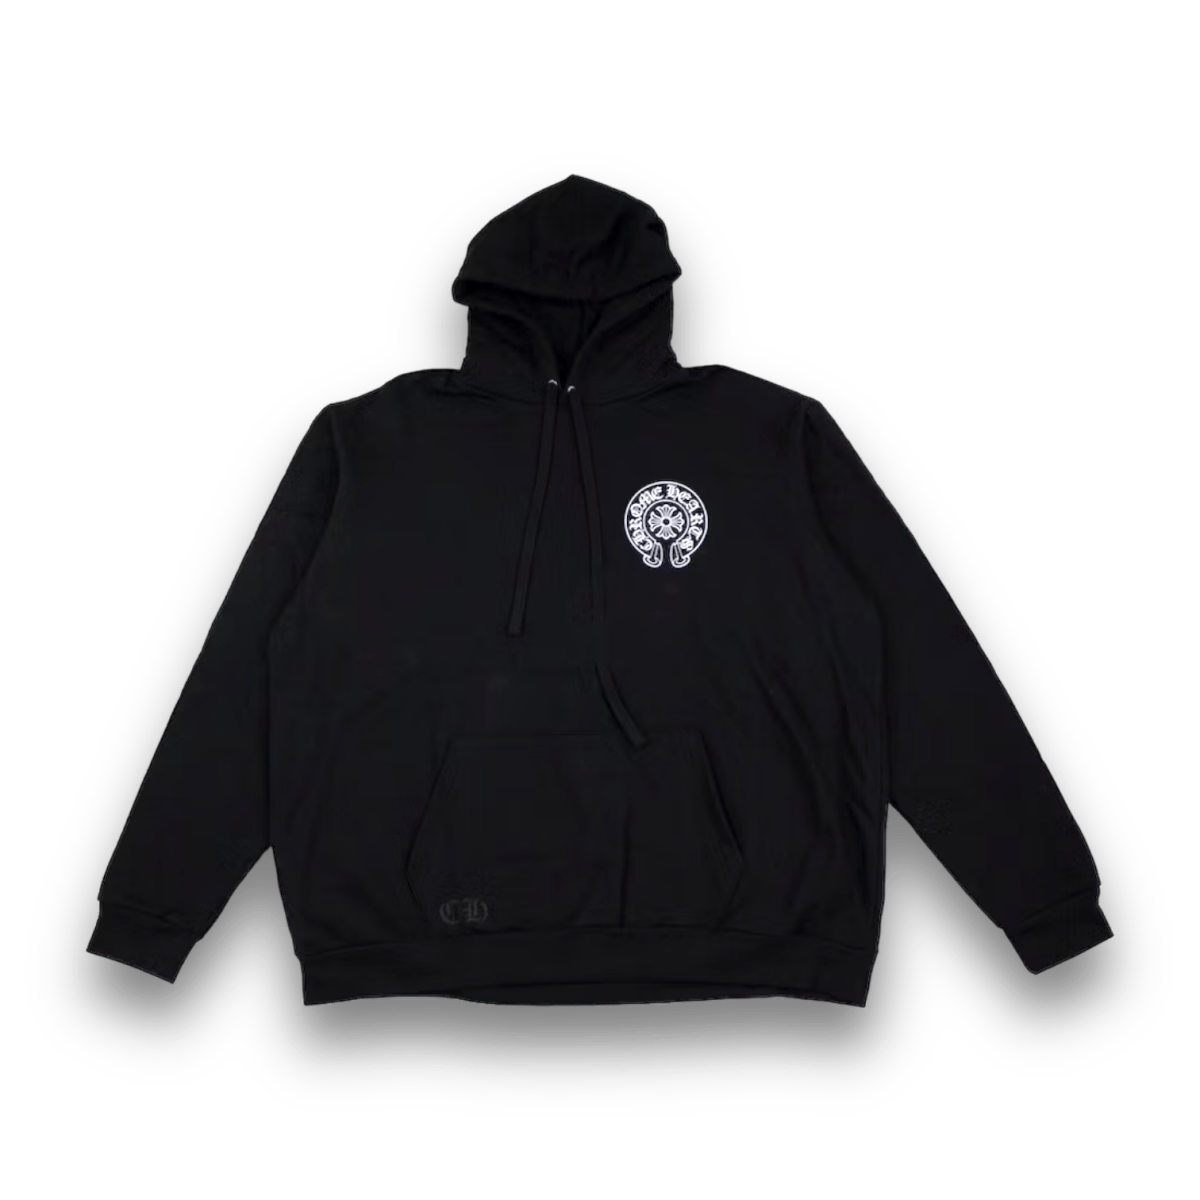 Chrome Hearts New York Exclusive Hoodie Black - Hoodie - Chrome Hearts - Jawns on Fire - sneakers